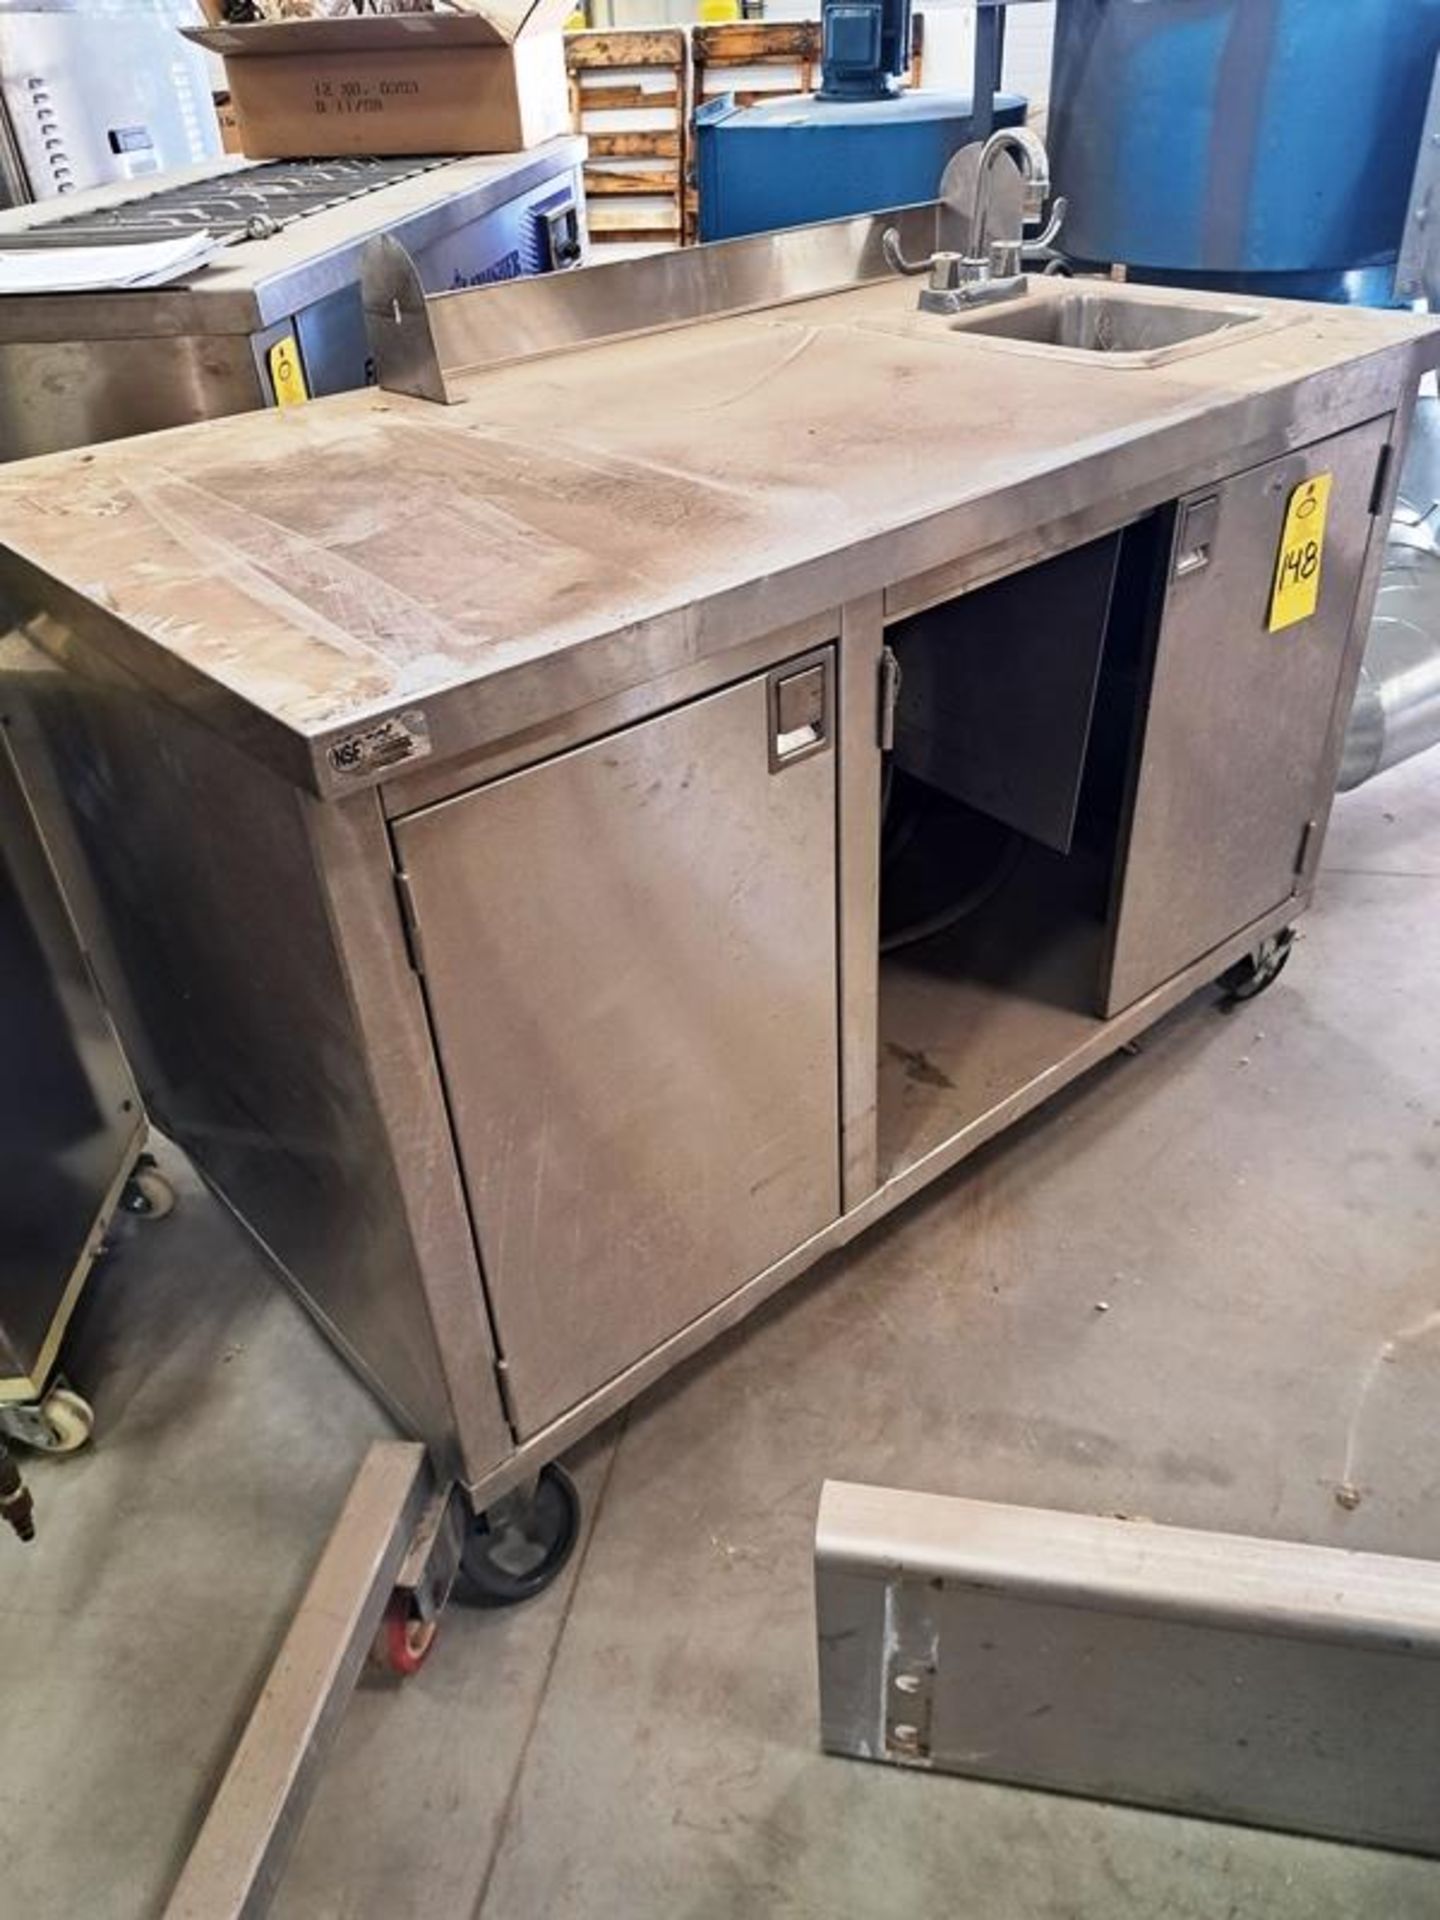 Refrigerated Prep Table with sink, 30" wide X 54" long X 30" deep (Required Loading Fee: $25.00)